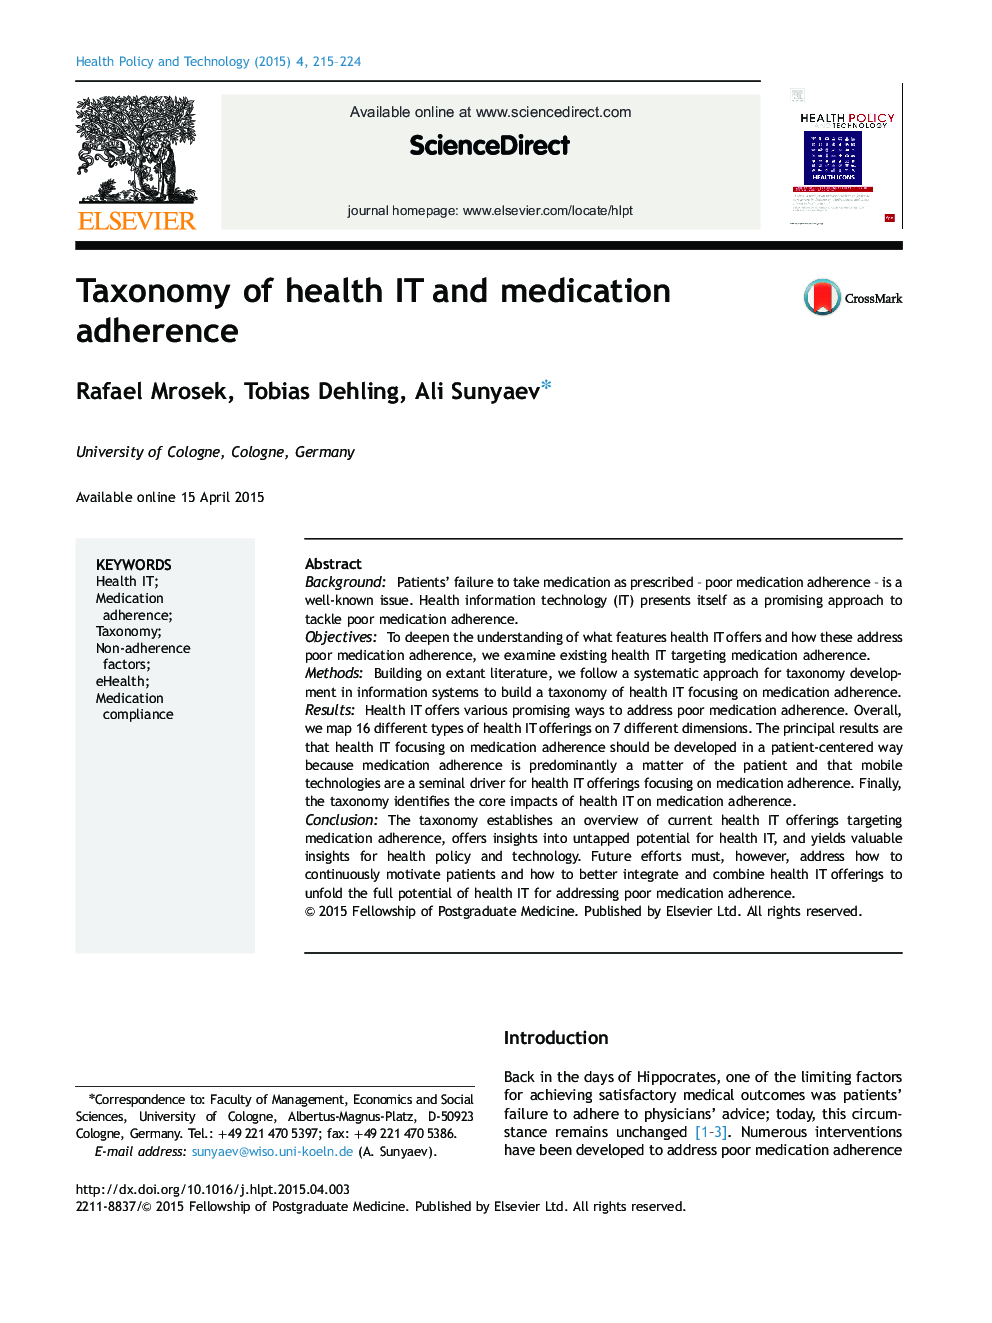 Taxonomy of health IT and medication adherence